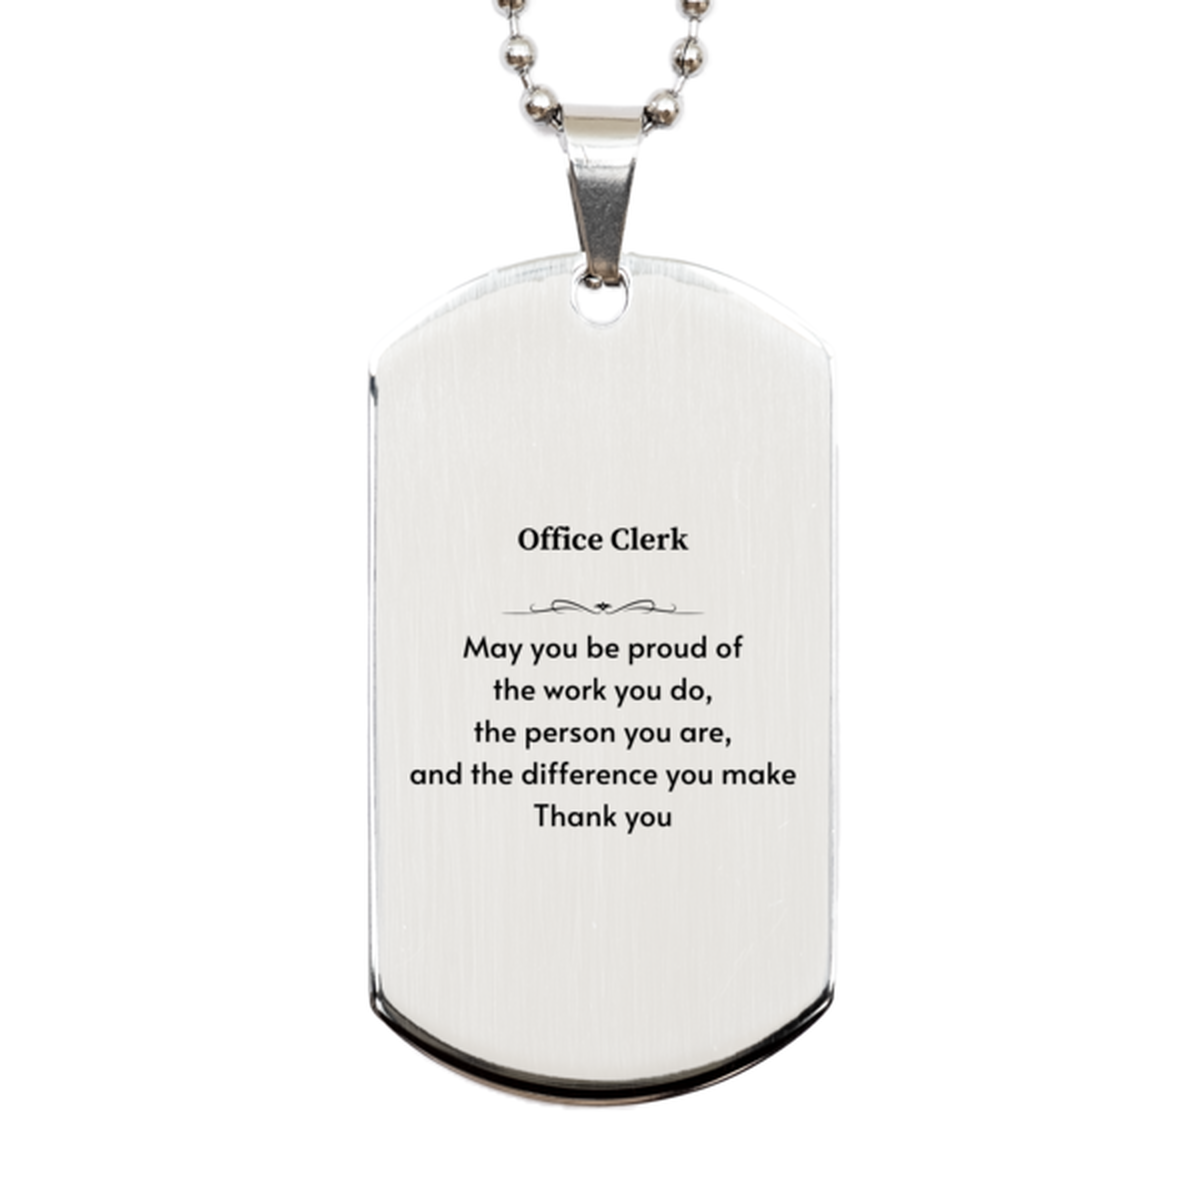 Heartwarming Silver Dog Tag Retirement Coworkers Gifts for Office Clerk, Office Clerk May You be proud of the work you do, the person you are Gifts for Boss Men Women Friends